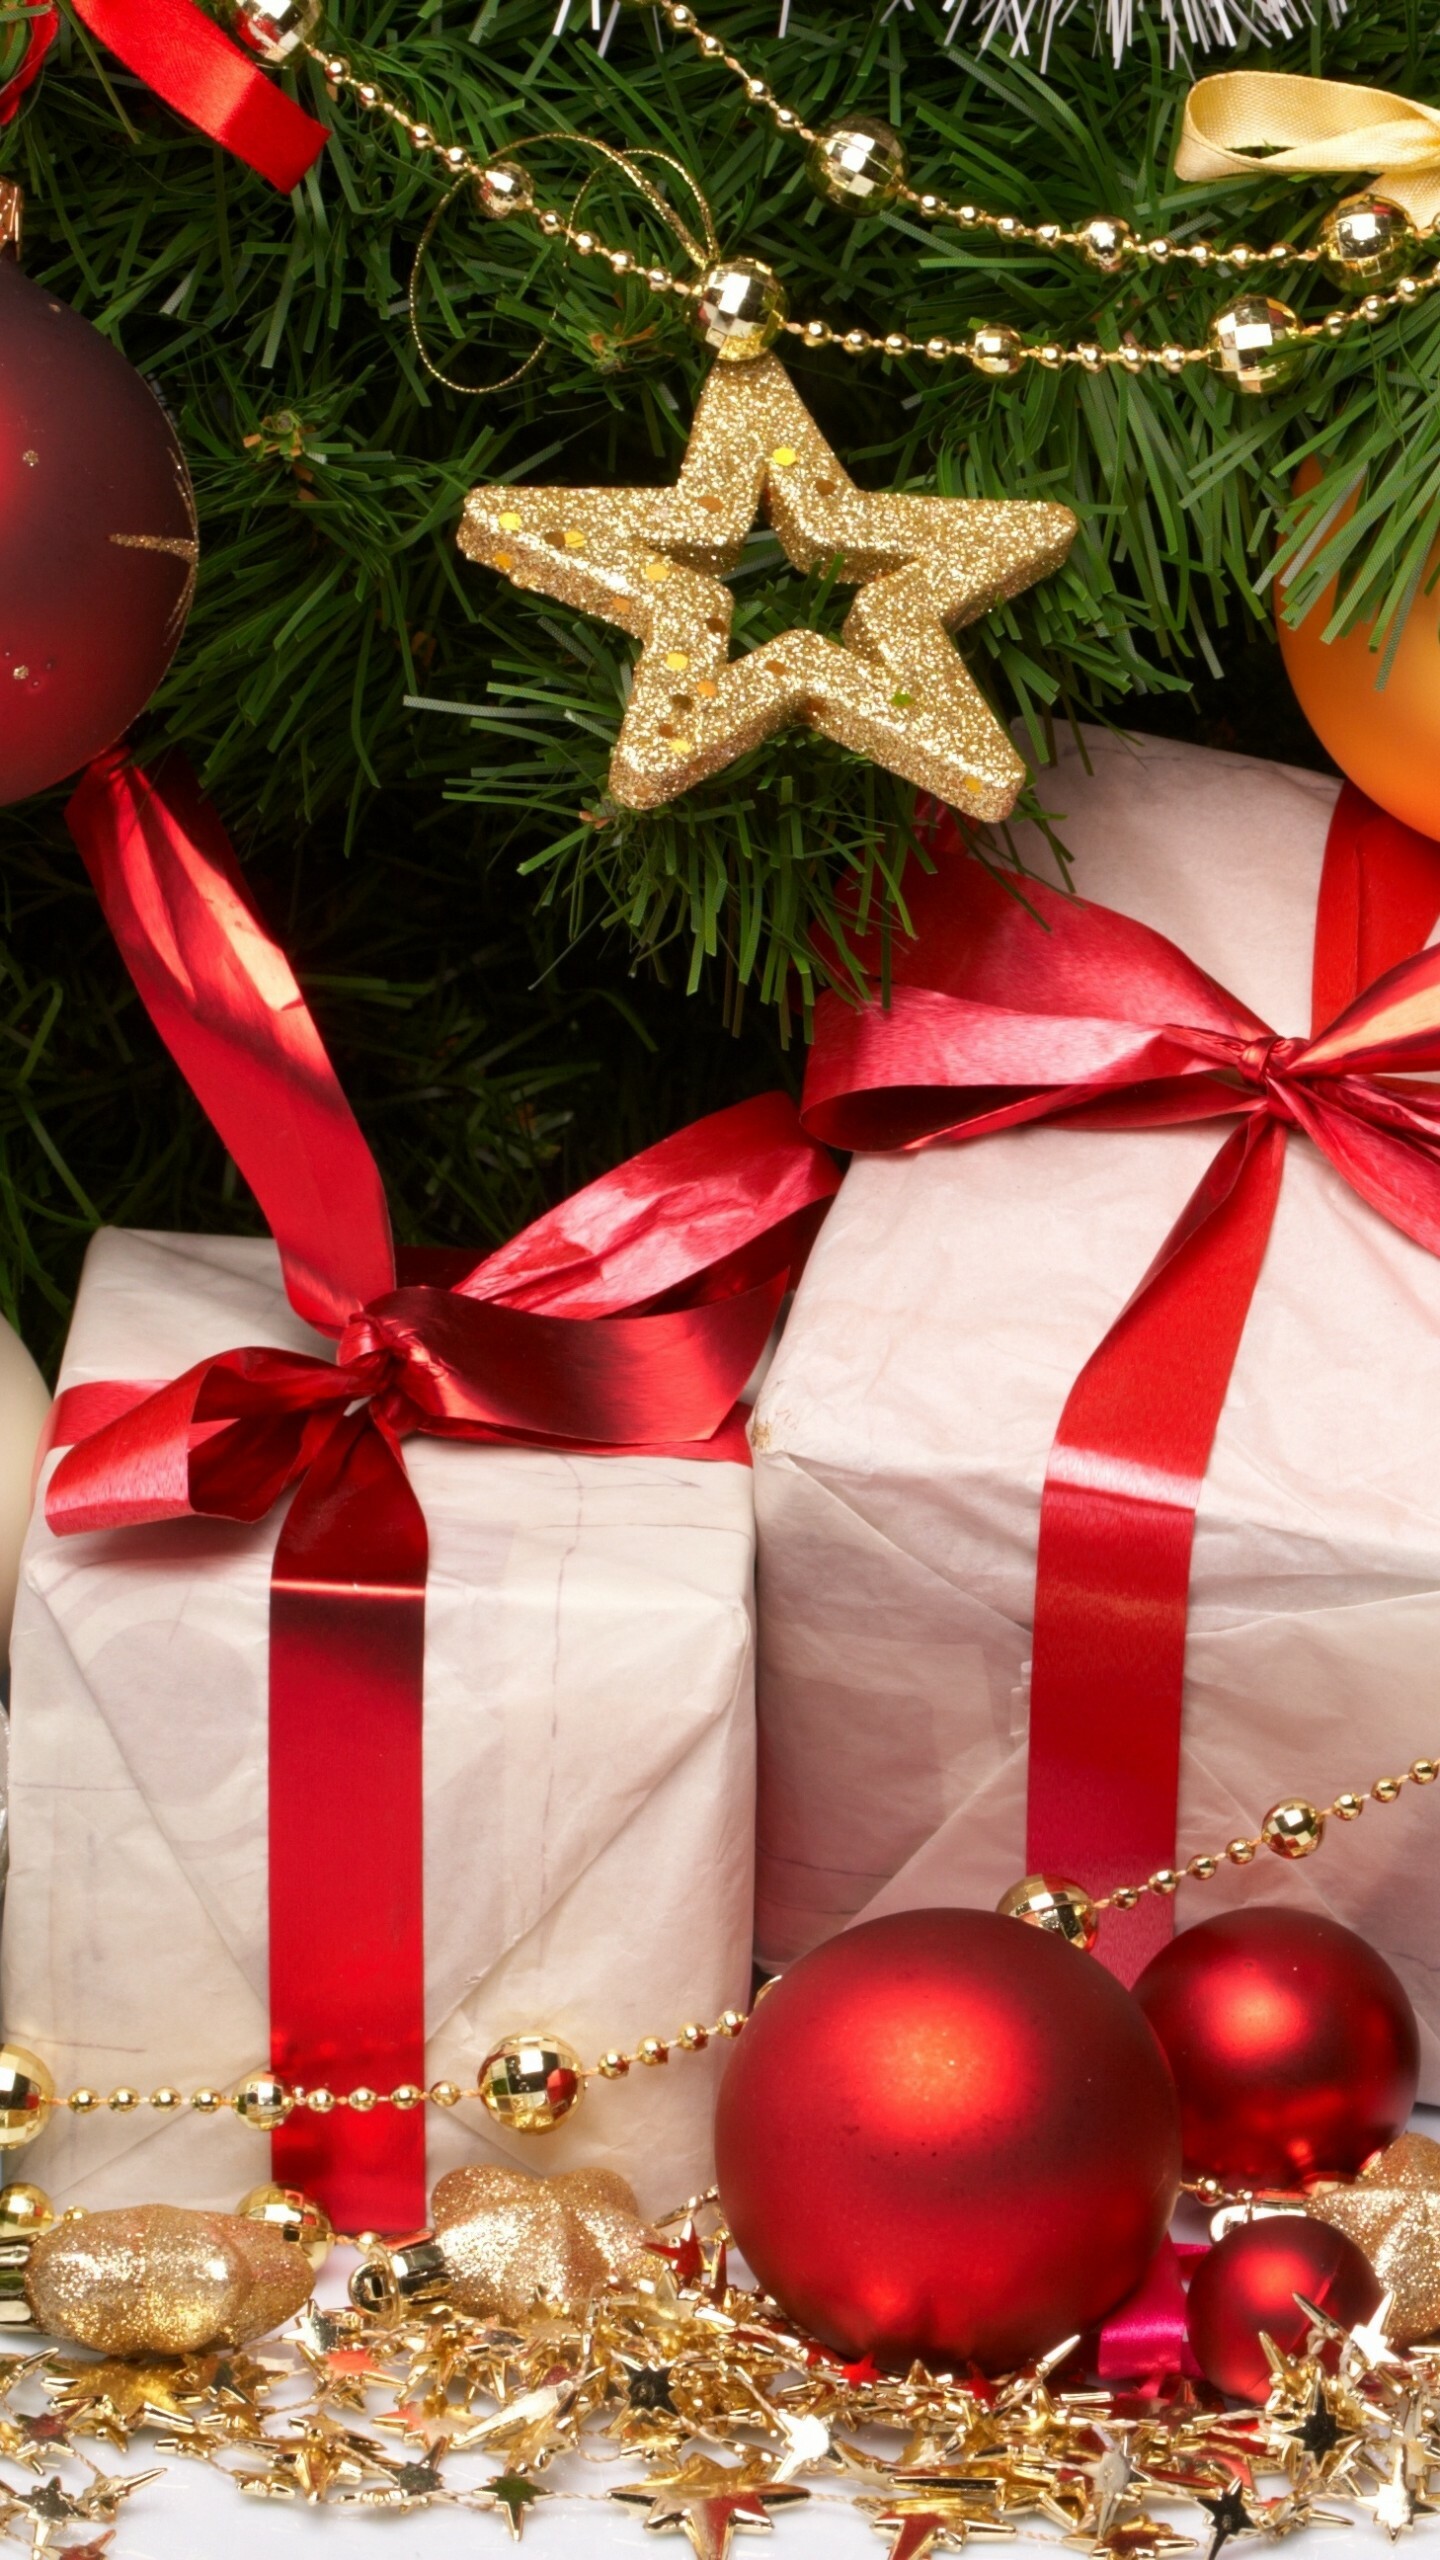 Christmas Gifts: New Year, Jewelry, Toys, Fir-tree, Holidays, Decoration, Presents. 1440x2560 HD Background.